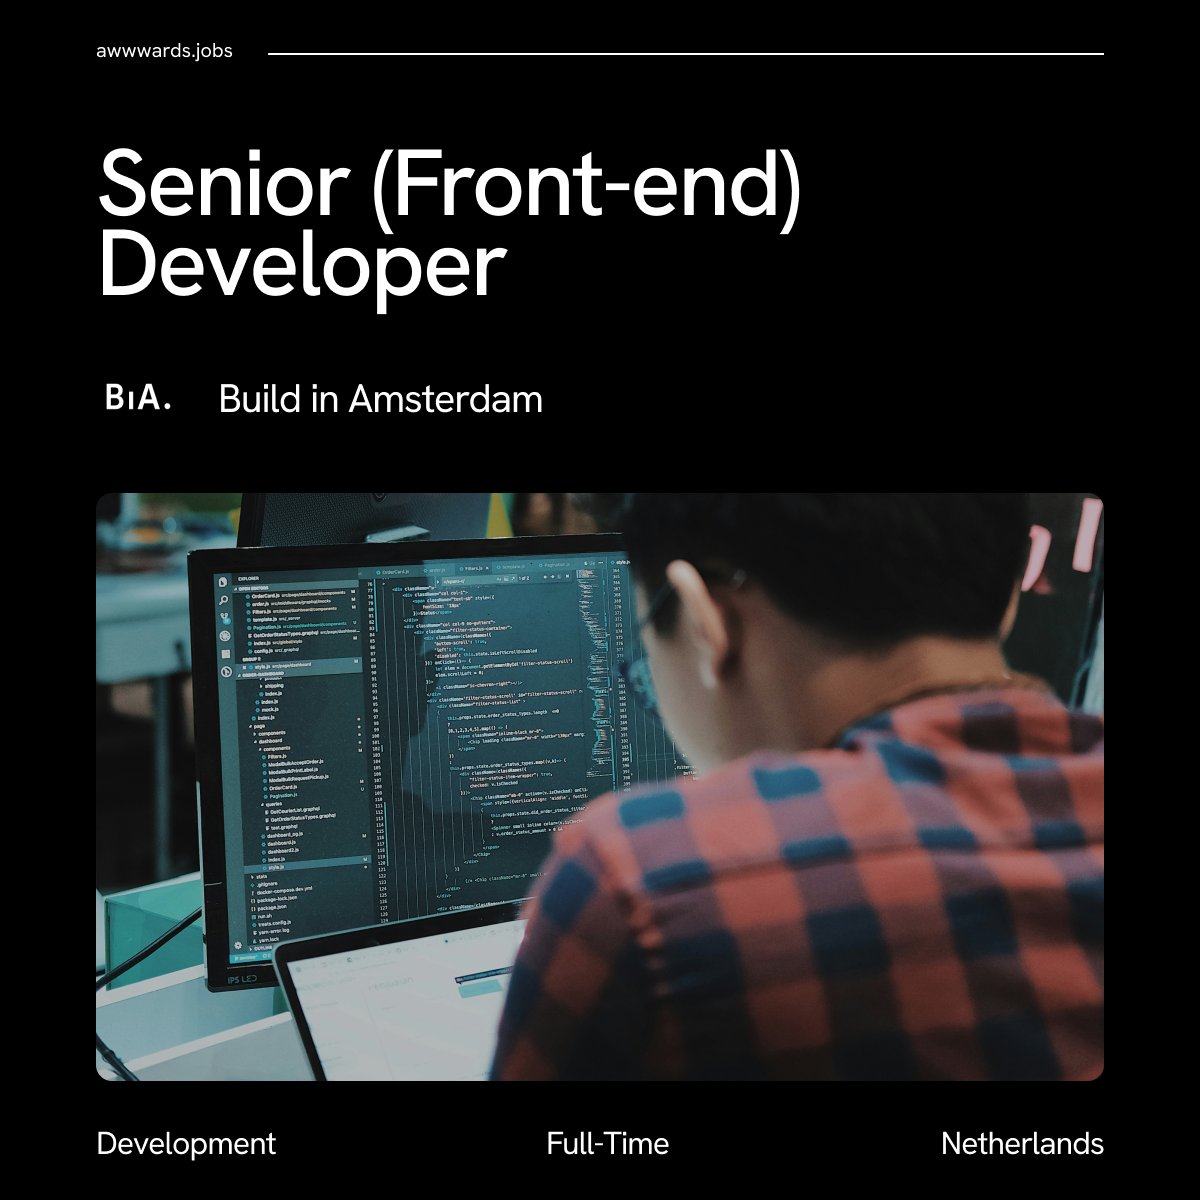 Calling all developers! 📣
The award-winning agency @buildinams  is looking for a #SeniorFrontEndDeveloper who is passionate about technology and loves good design. Don’t miss the opportunity to join their team! Details and application here: bit.ly/4bYlOo0